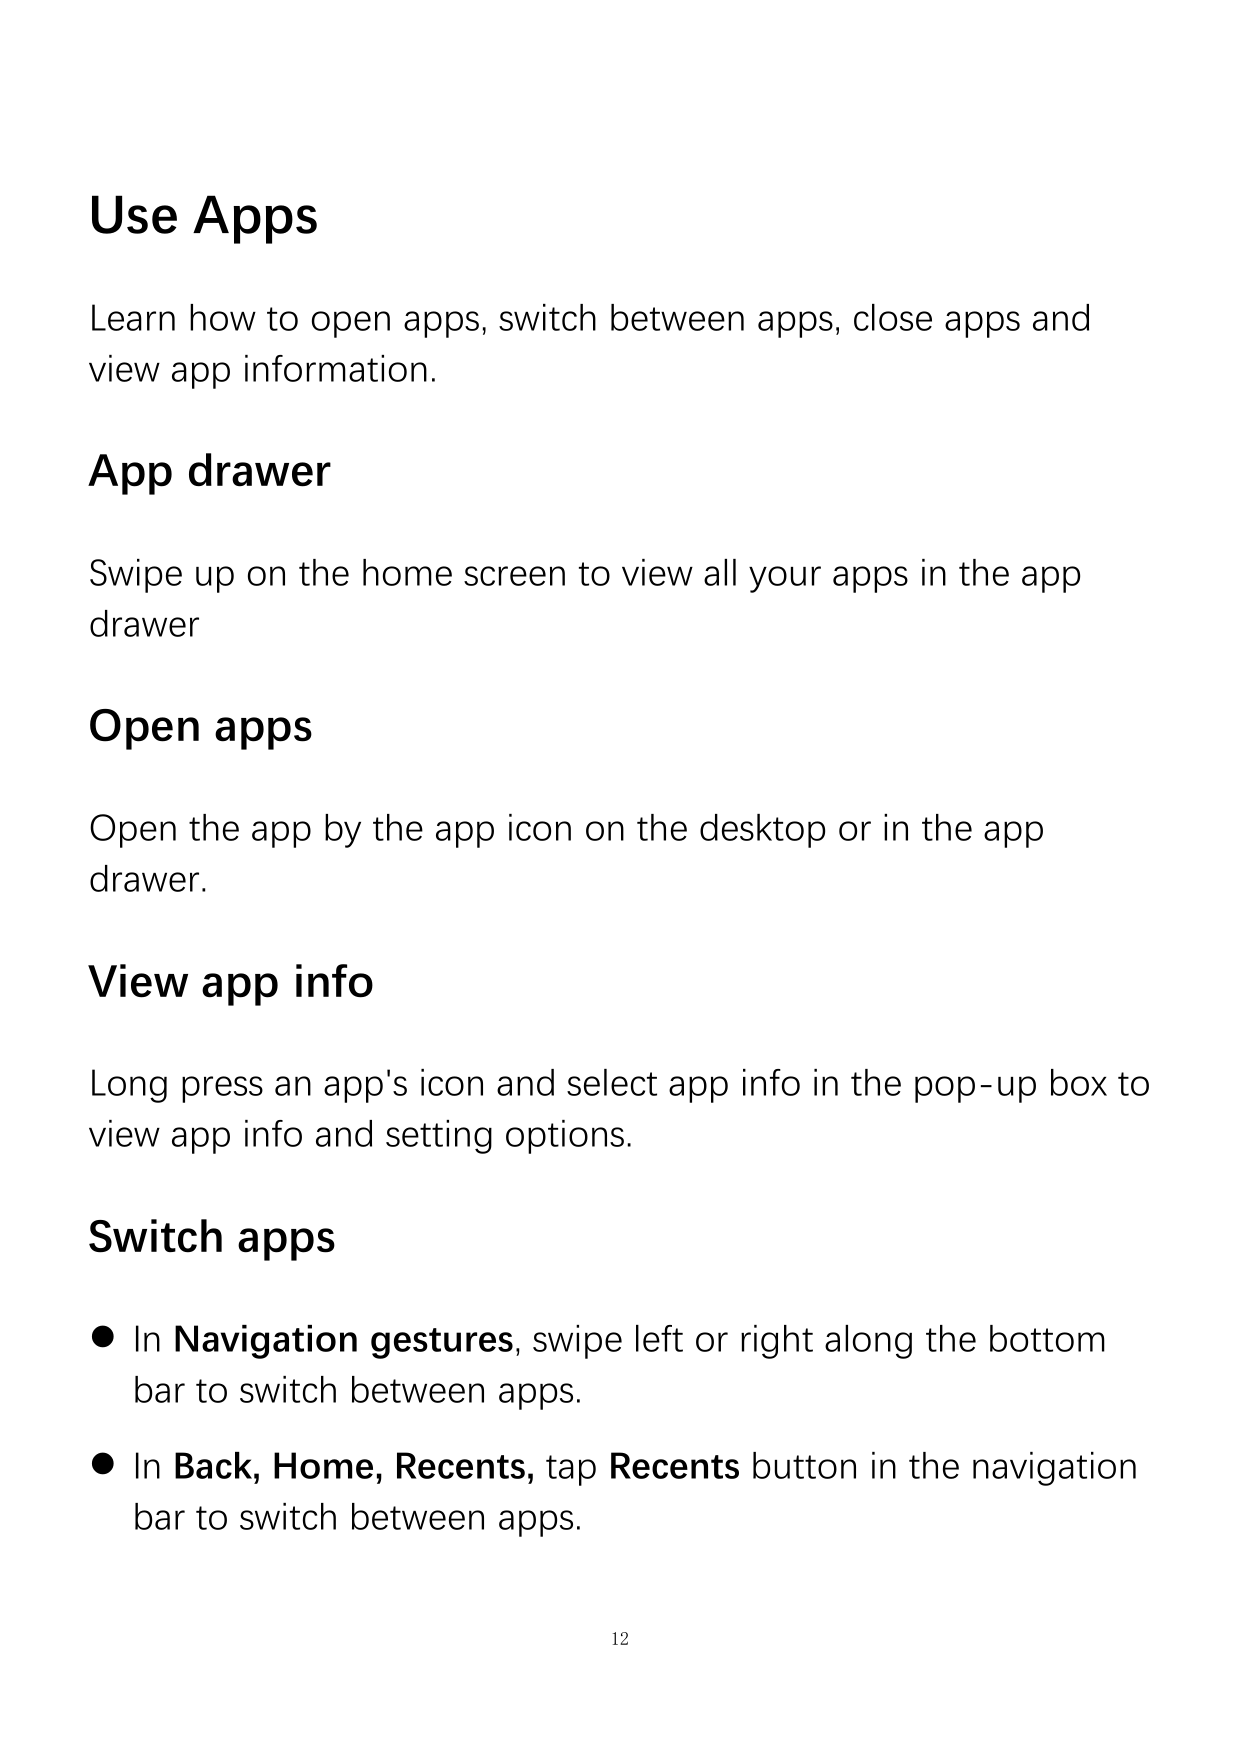 Use AppsLearn how to open apps, switch between apps, close apps andview app information.App drawerSwipe up on the home screen to